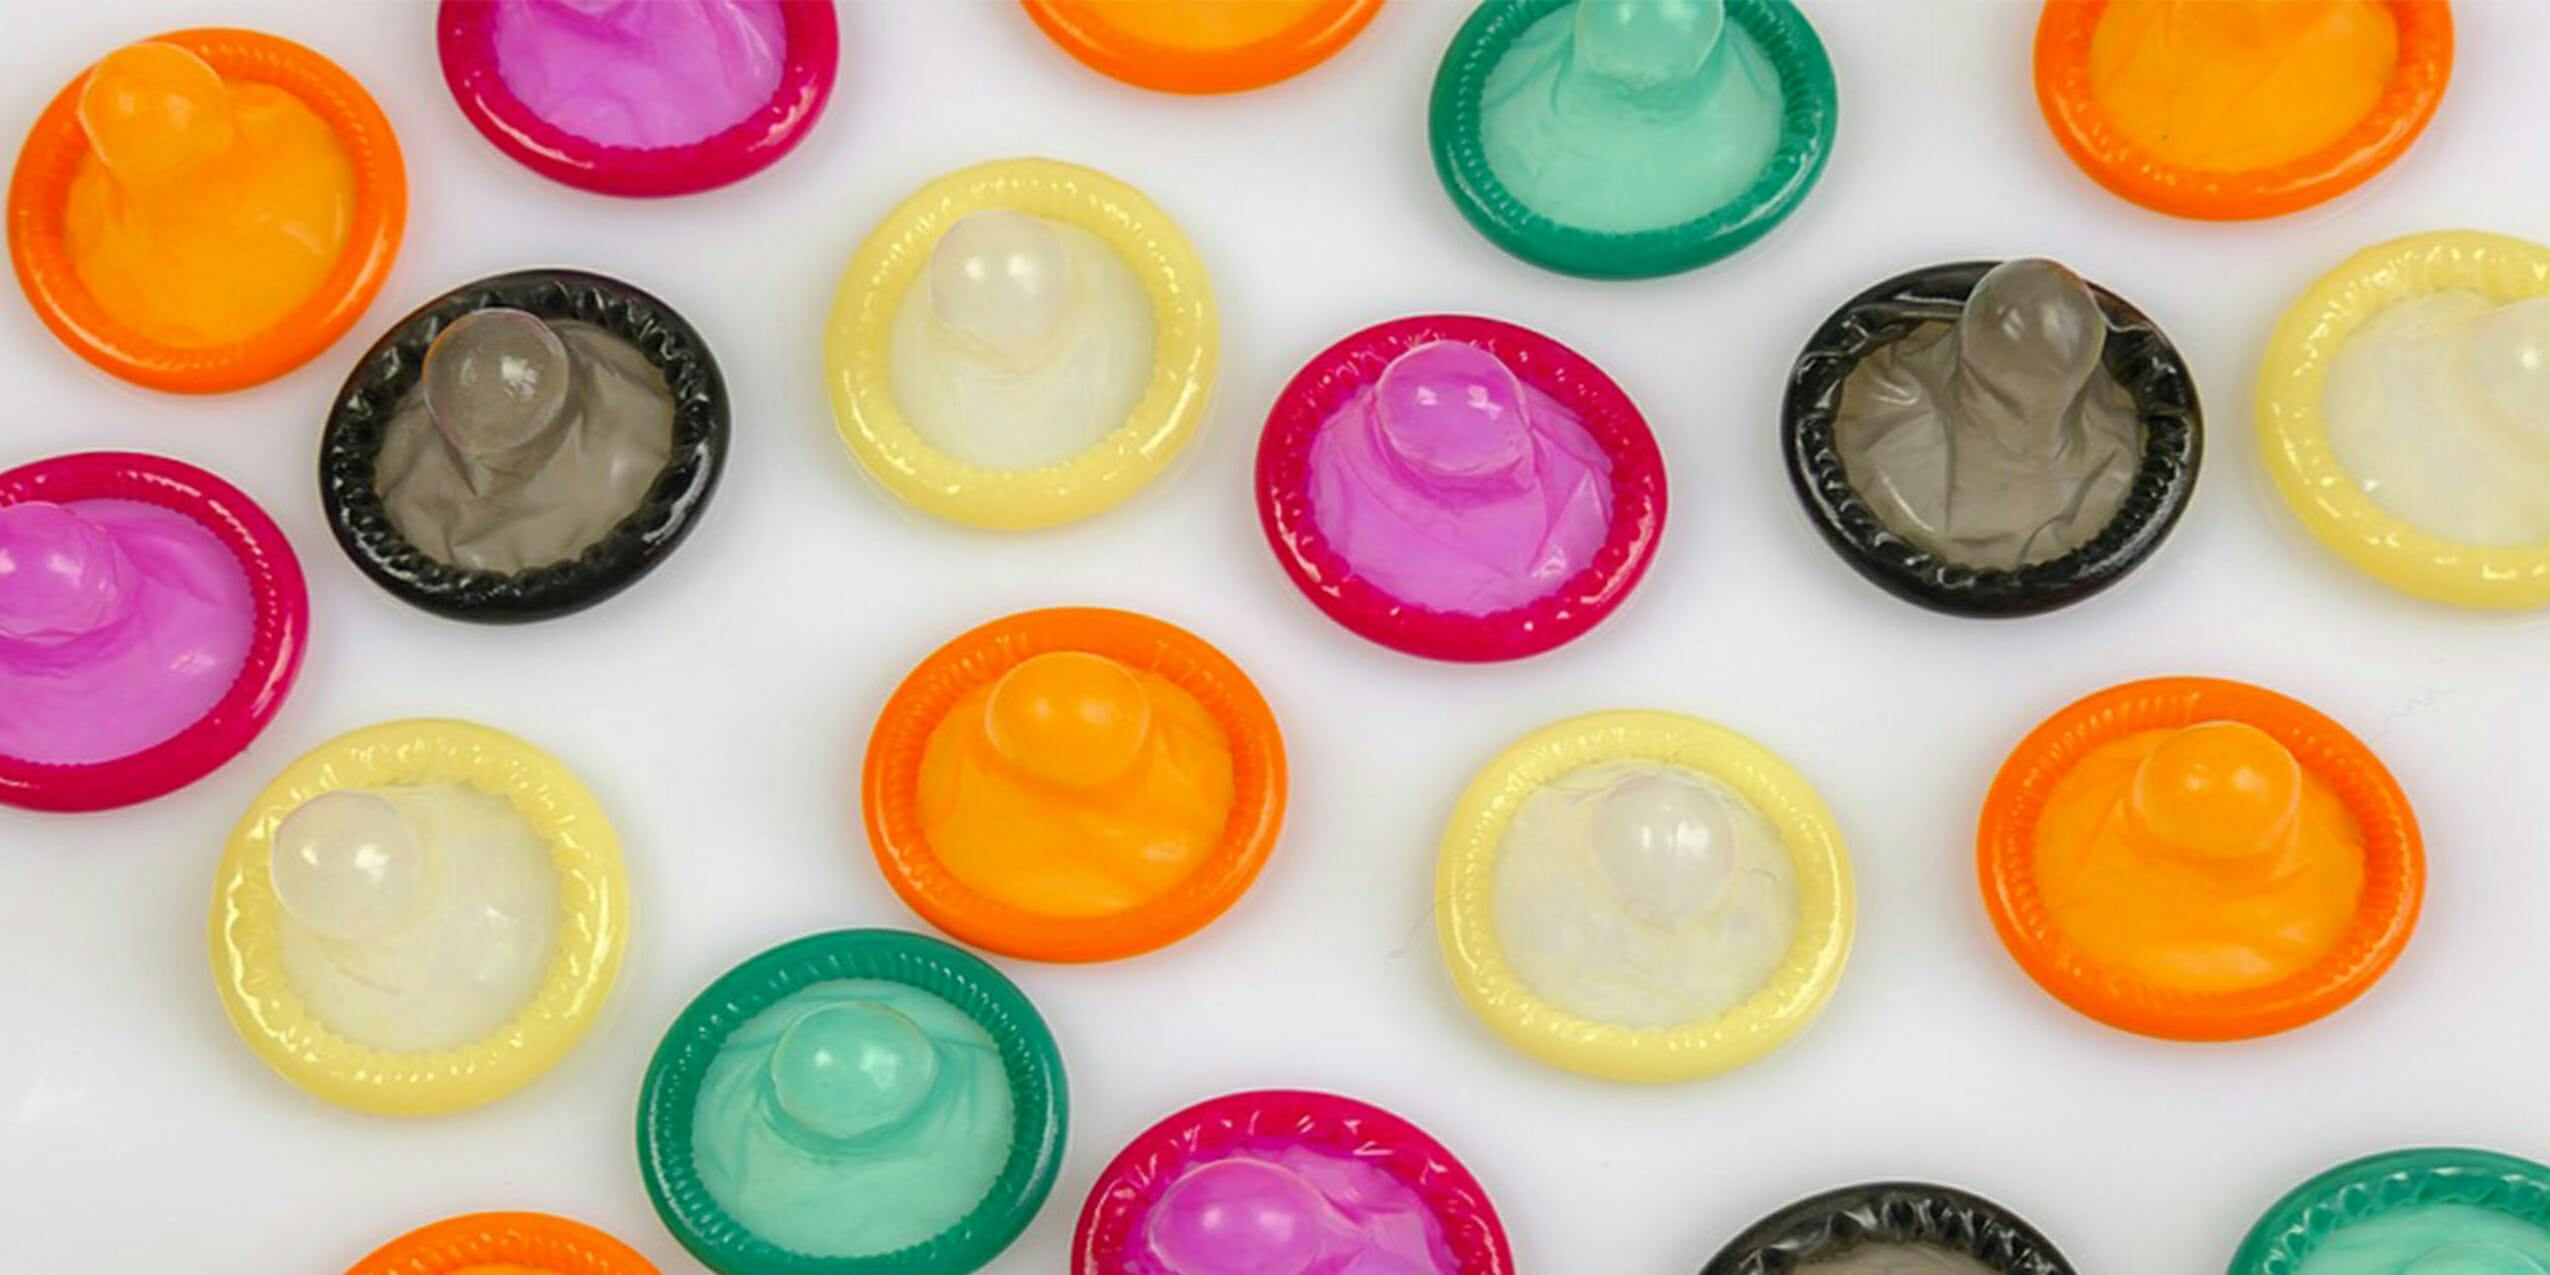 These 5 condoms will make sex feel incredible